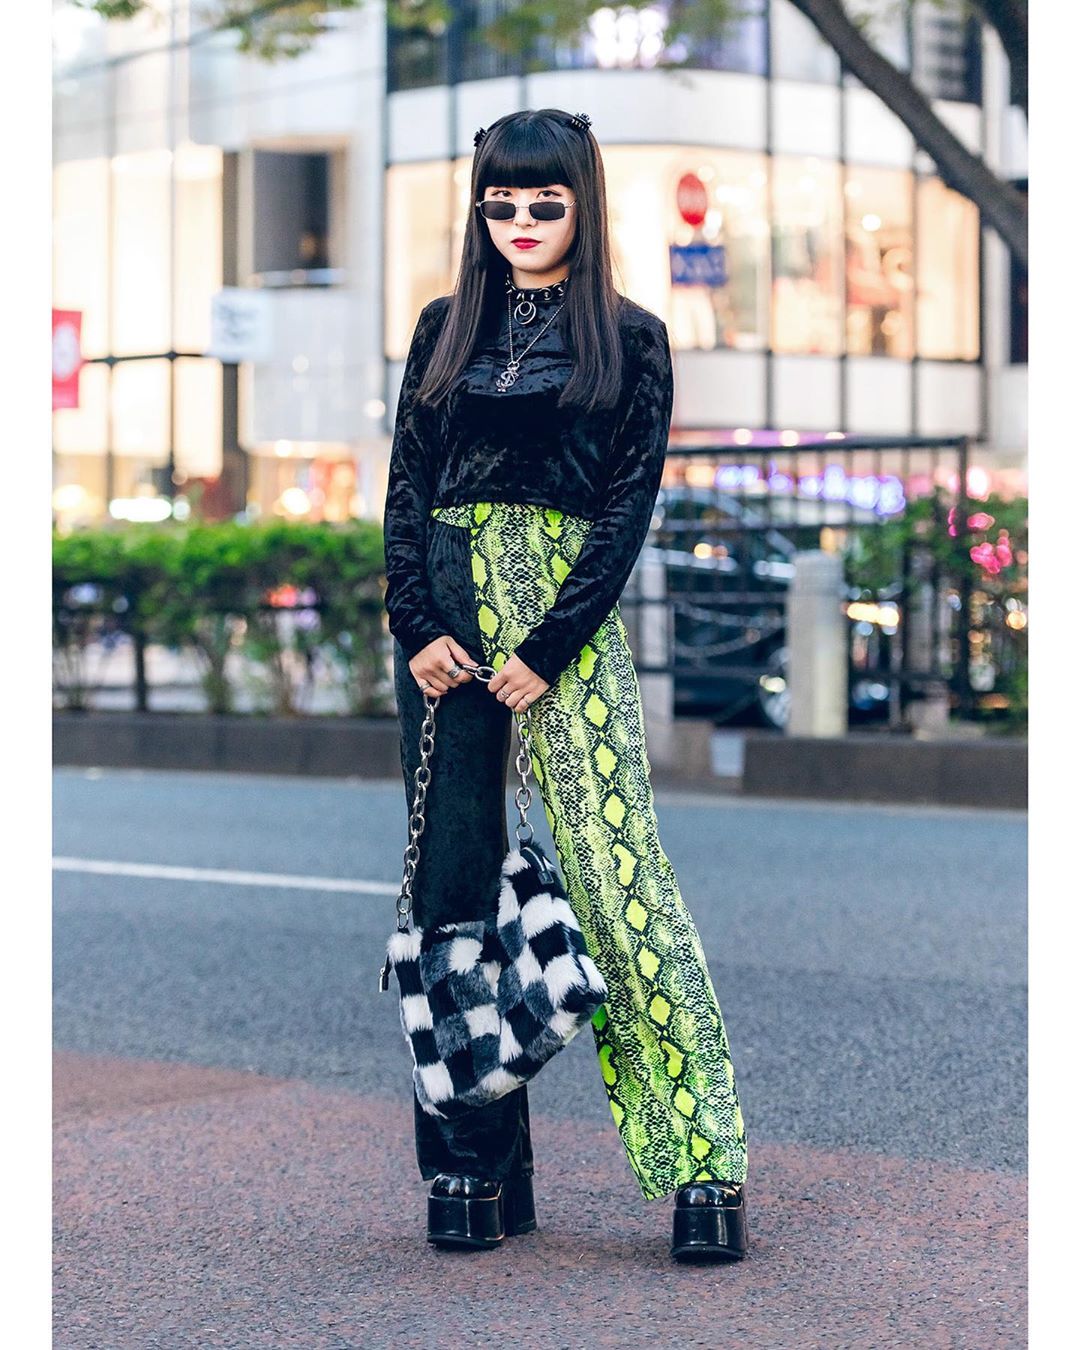 Tokyo Fashion: 16-year-old Japanese student Mai (@datenshi_qq) on the ...